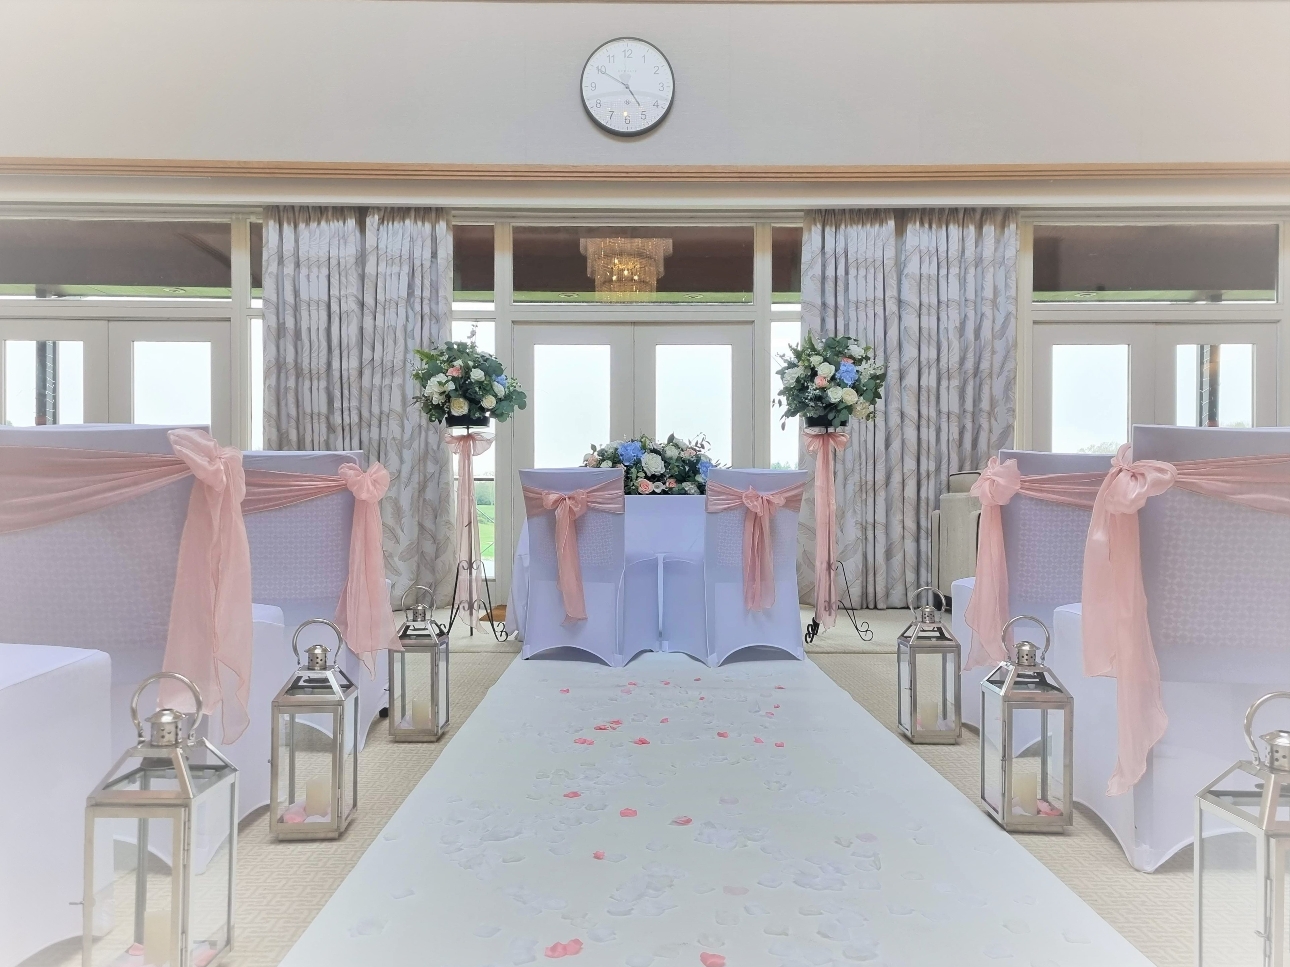 Bearwood Lakes, in Wokingham, is exhibiting at the Signature Wedding Show at Ascot Racecourse: Image 1